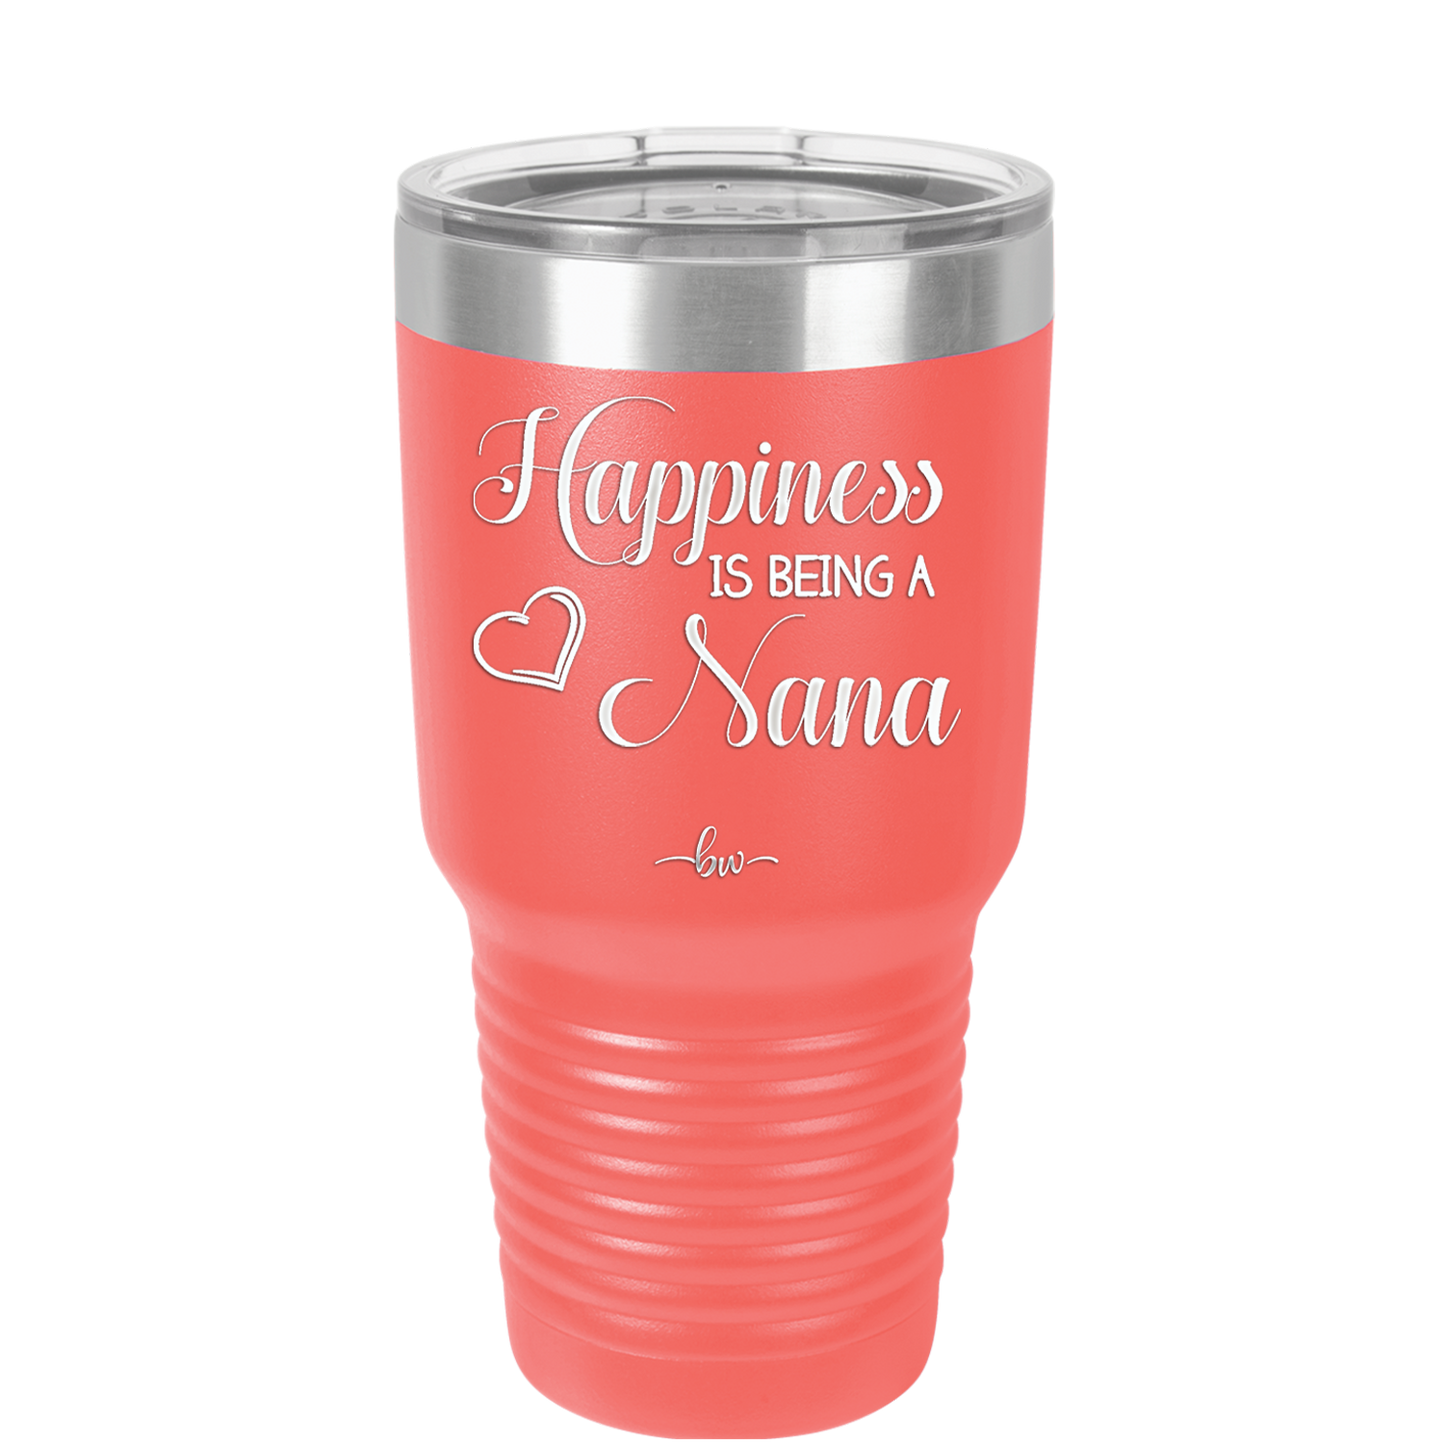 Happiness is Being a Nana - Laser Engraved Stainless Steel Drinkware - 1550 -